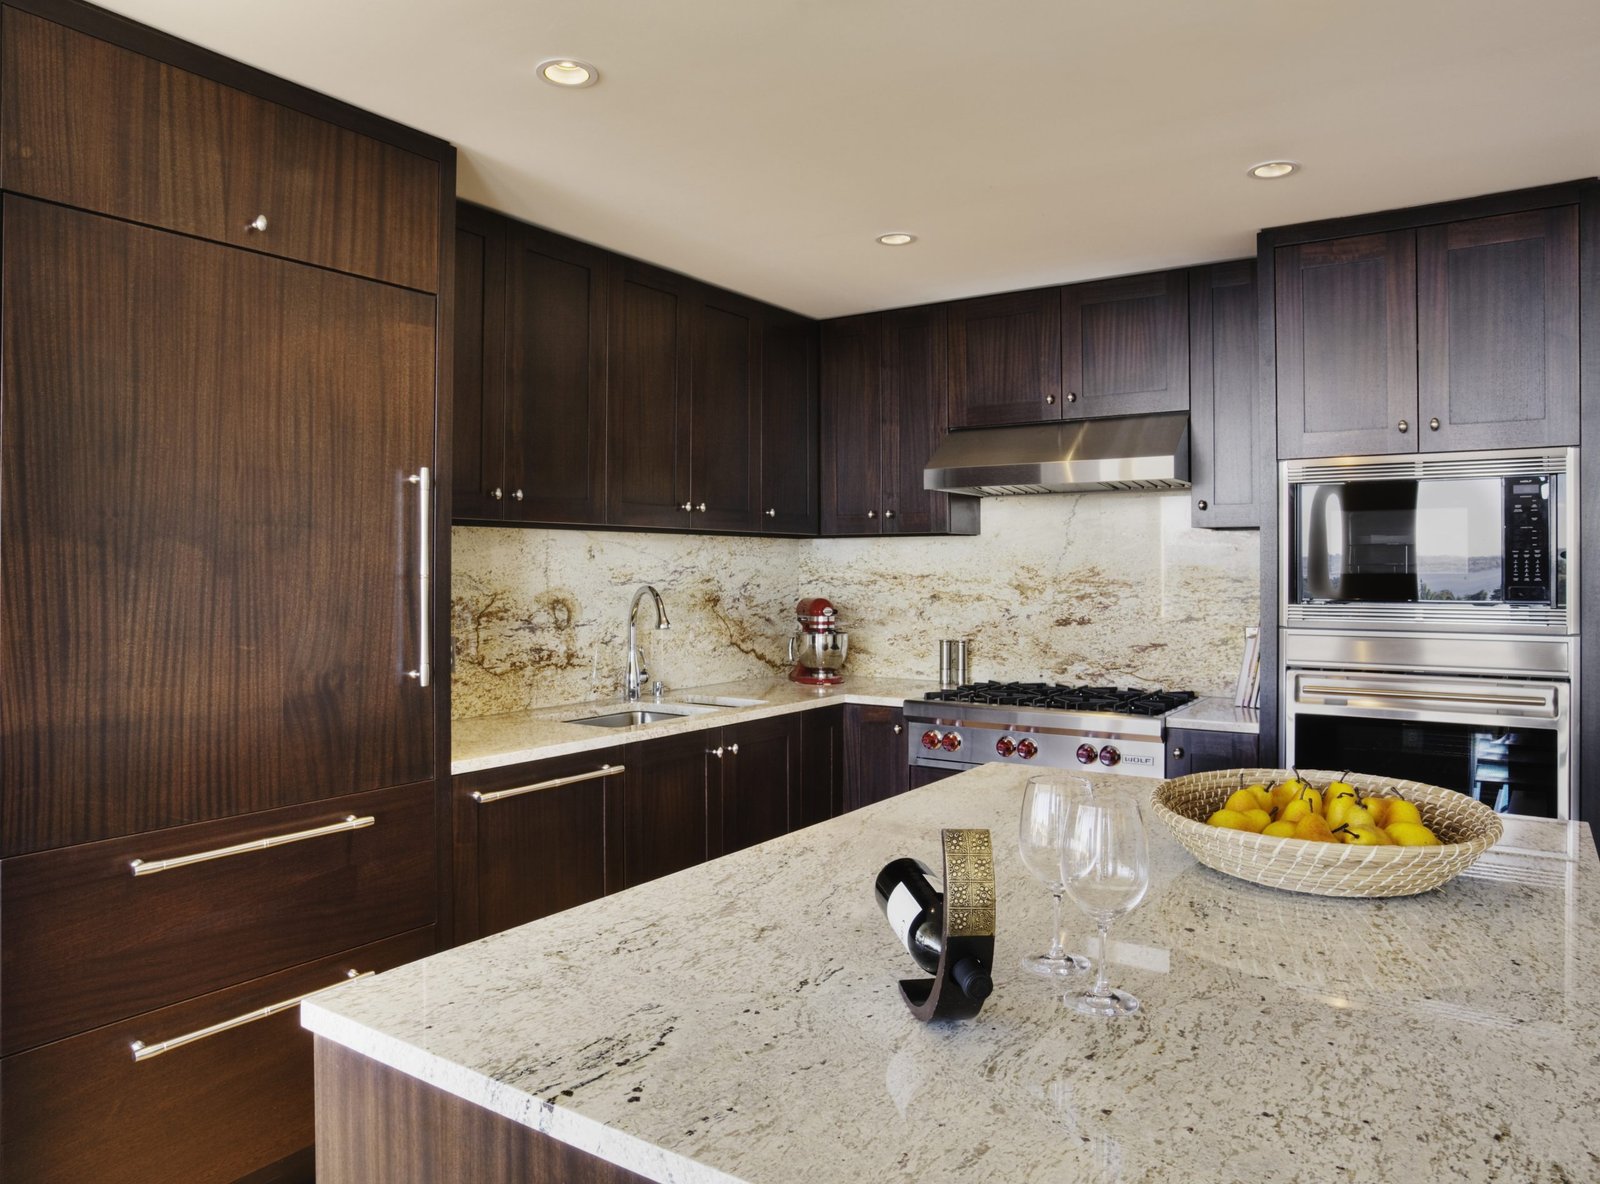 How to Clean Your Granite Tiles Properly